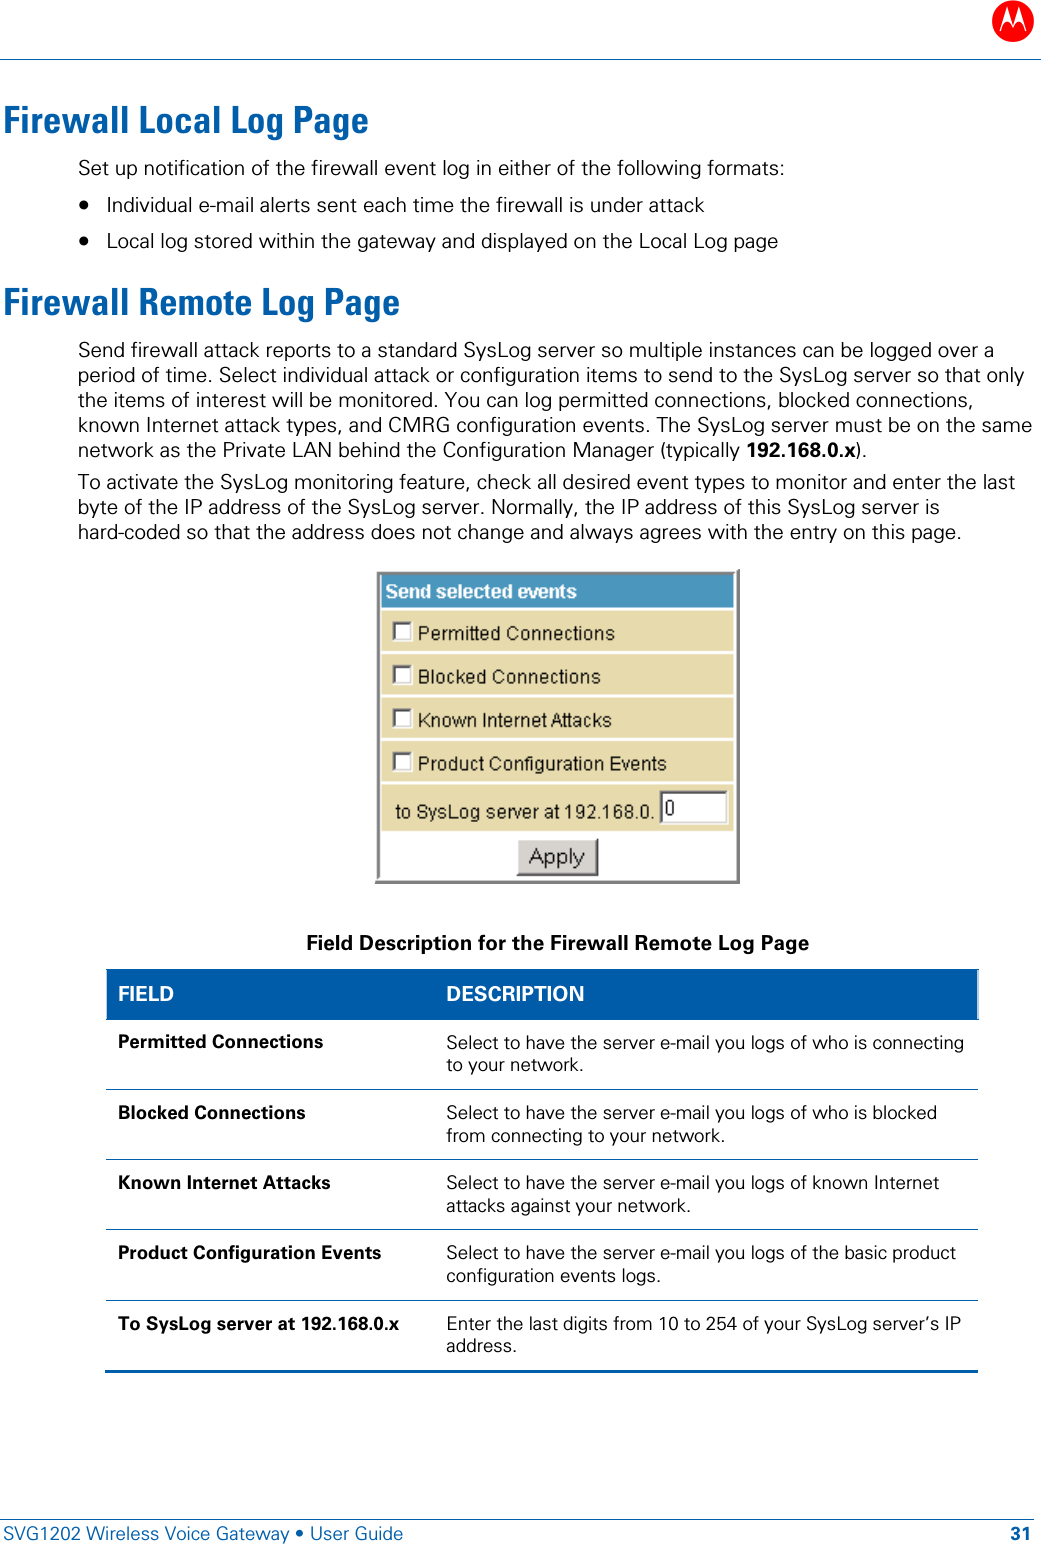 B   SVG1202 Wireless Voice Gateway • User Guide 31  Firewall Local Log Page Set up notification of the firewall event log in either of the following formats: • Individual e-mail alerts sent each time the firewall is under attack • Local log stored within the gateway and displayed on the Local Log page Firewall Remote Log Page Send firewall attack reports to a standard SysLog server so multiple instances can be logged over a period of time. Select individual attack or configuration items to send to the SysLog server so that only the items of interest will be monitored. You can log permitted connections, blocked connections, known Internet attack types, and CMRG configuration events. The SysLog server must be on the same network as the Private LAN behind the Configuration Manager (typically 192.168.0.x).  To activate the SysLog monitoring feature, check all desired event types to monitor and enter the last byte of the IP address of the SysLog server. Normally, the IP address of this SysLog server is hard-coded so that the address does not change and always agrees with the entry on this page.   Field Description for the Firewall Remote Log Page FIELD  DESCRIPTION Permitted Connections Select to have the server e-mail you logs of who is connecting to your network. Blocked Connections Select to have the server e-mail you logs of who is blocked from connecting to your network. Known Internet Attacks Select to have the server e-mail you logs of known Internet attacks against your network. Product Configuration Events Select to have the server e-mail you logs of the basic product configuration events logs. To SysLog server at 192.168.0.x  Enter the last digits from 10 to 254 of your SysLog server’s IP address.     